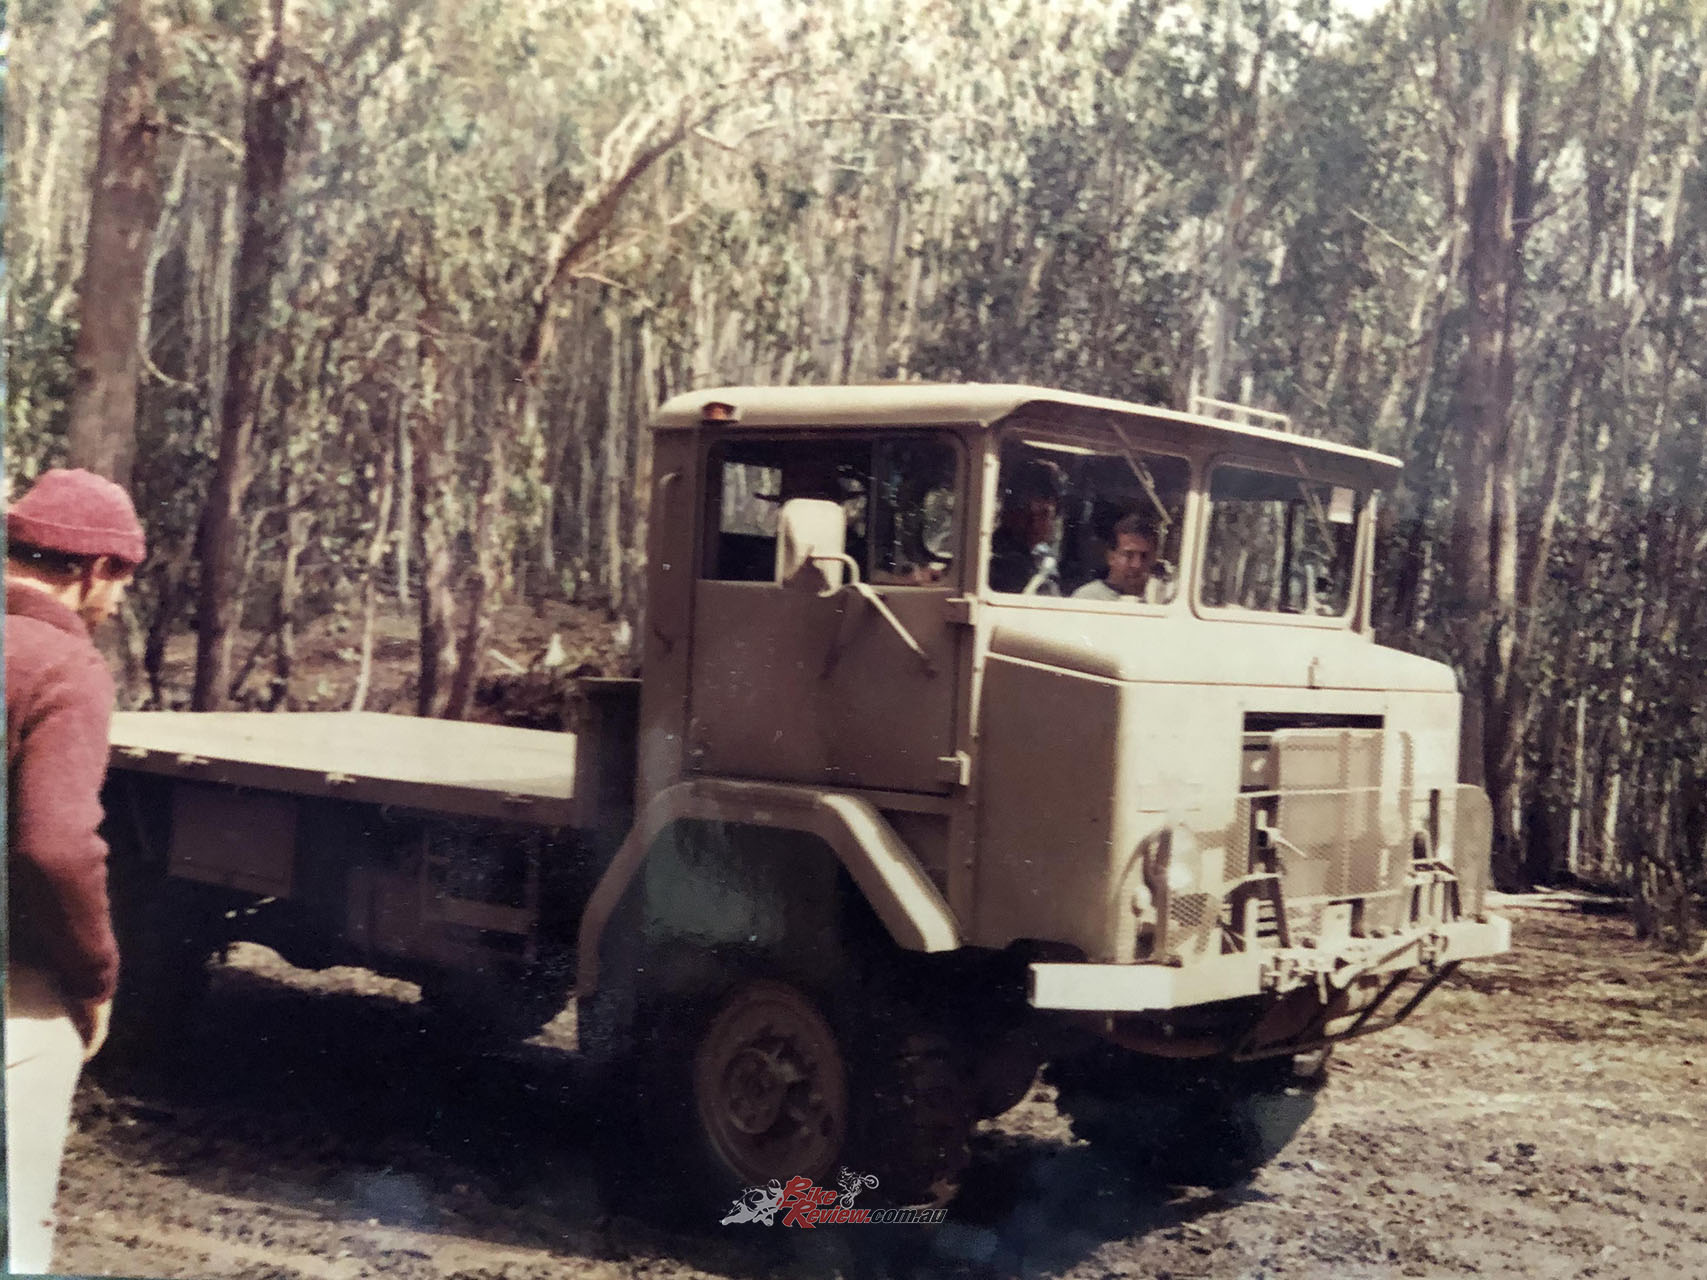 Rob did enjoy hosting international guests during the Swann Series, and once, he took a group of riders and journos out in his new pride and joy – an army troop carrier – into the steep hills outside Wodonga.